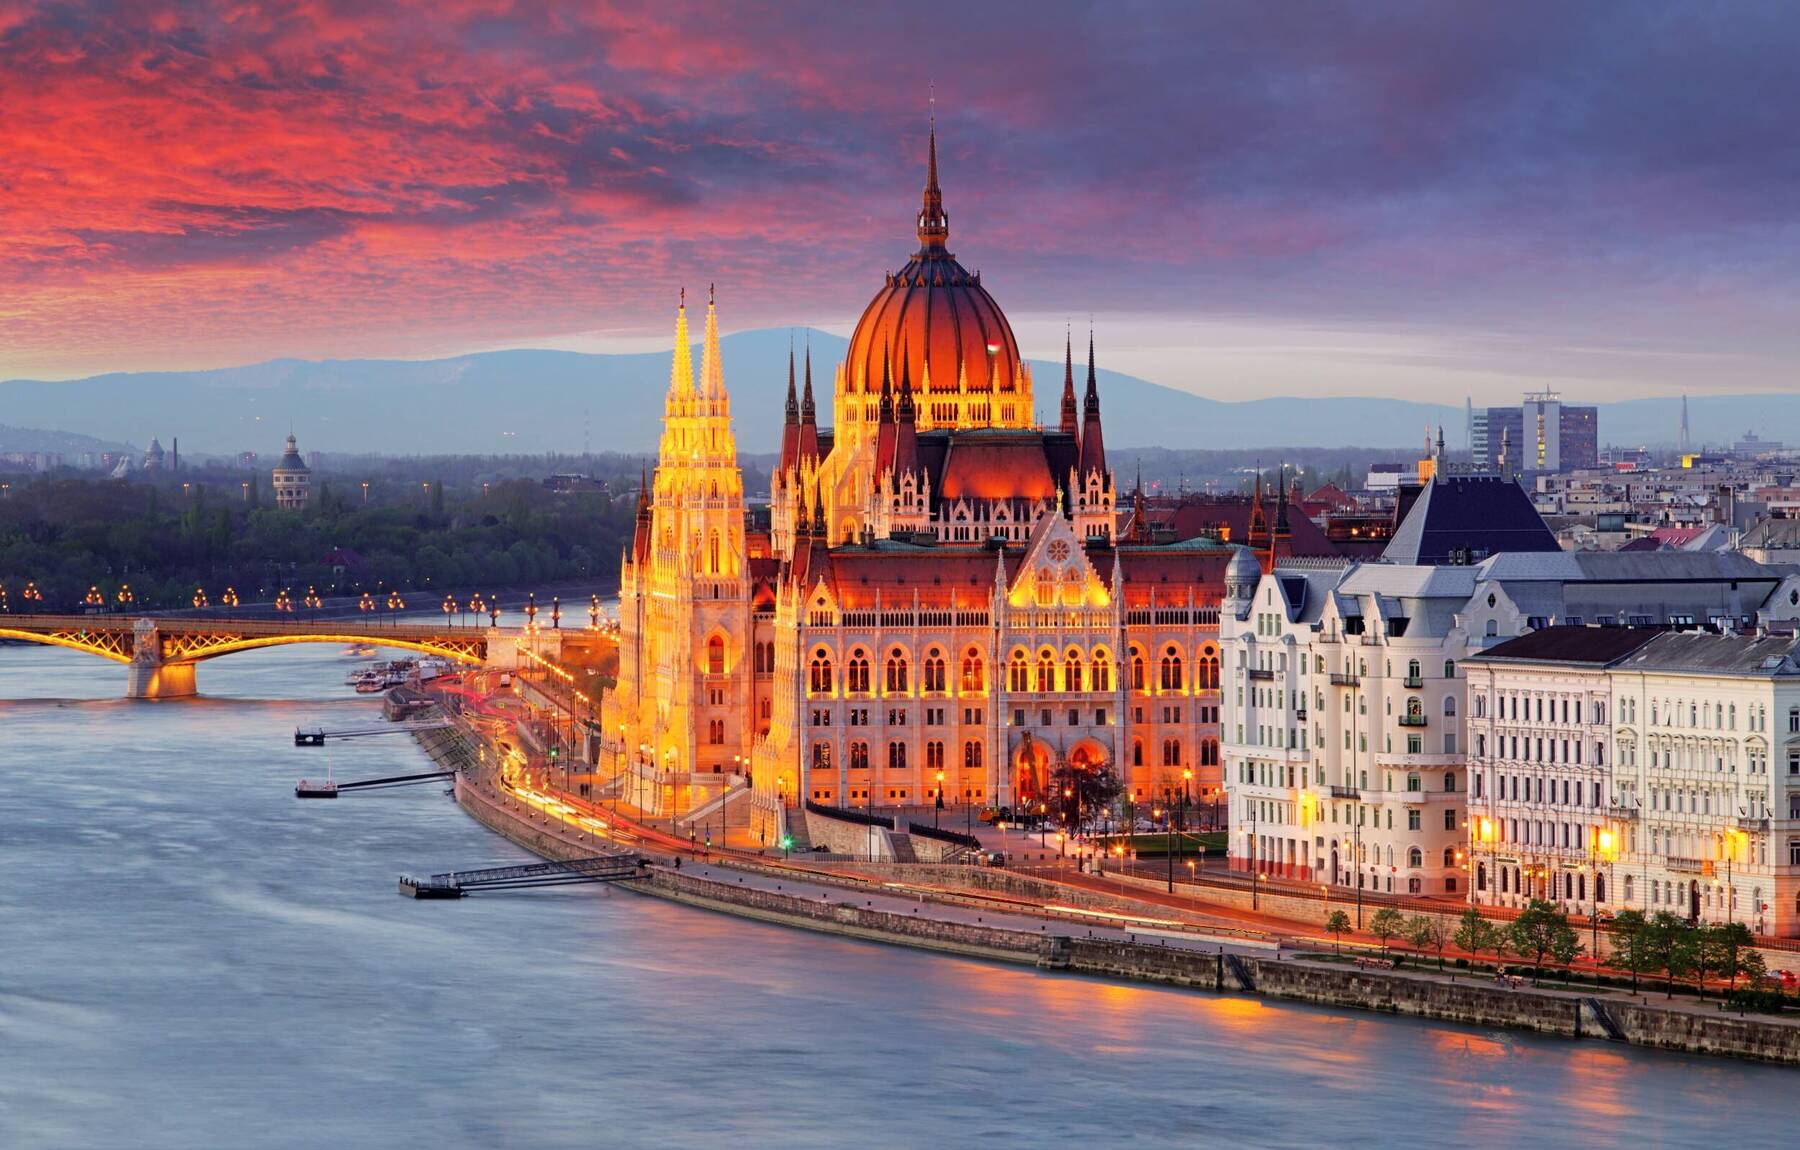 48 hours in dazzling Budapest